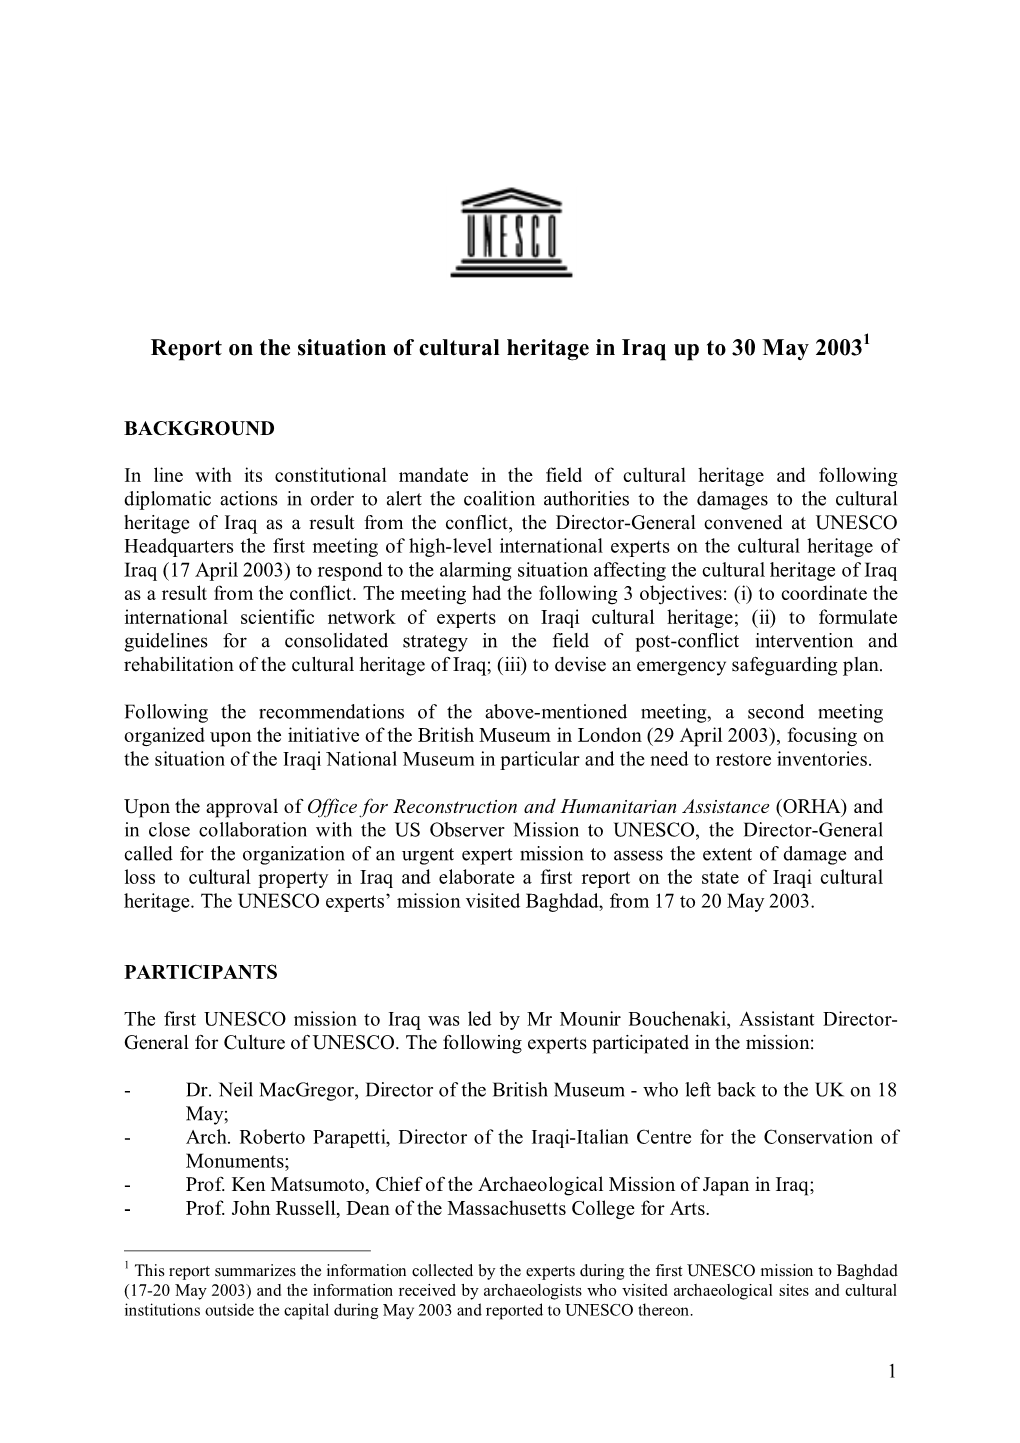 Report on the Situation of Cultural Heritage in Iraq up to 30 May 20031